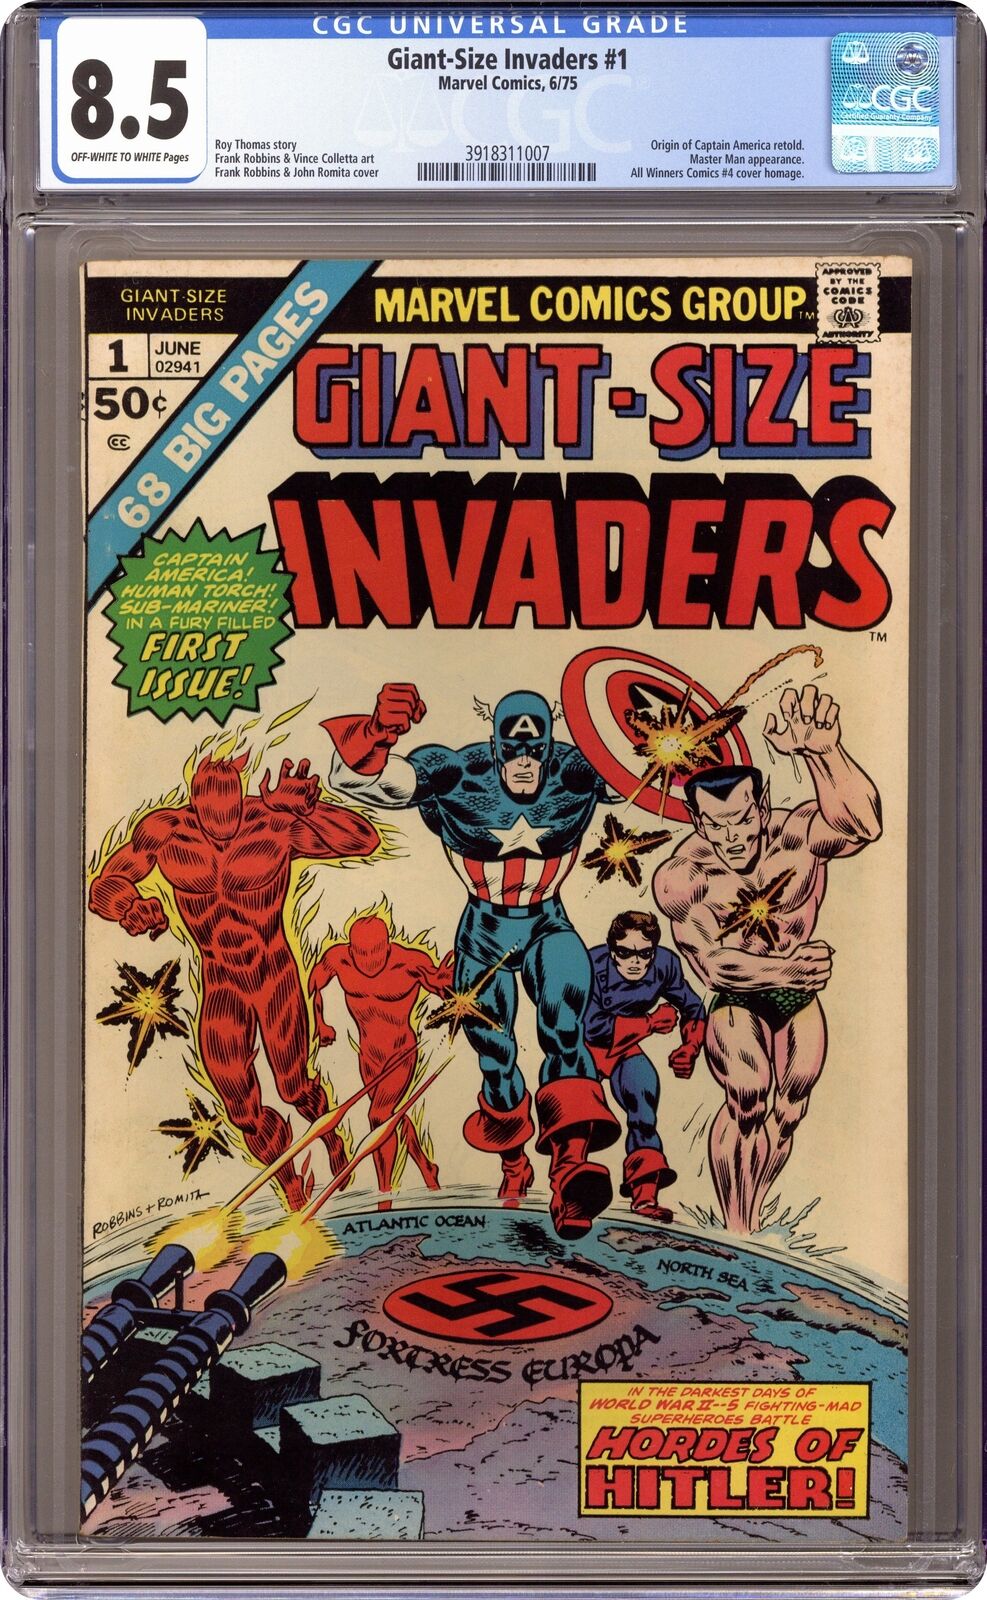 Giant Size Invaders #1 CGC 8.5 1975 3918311007